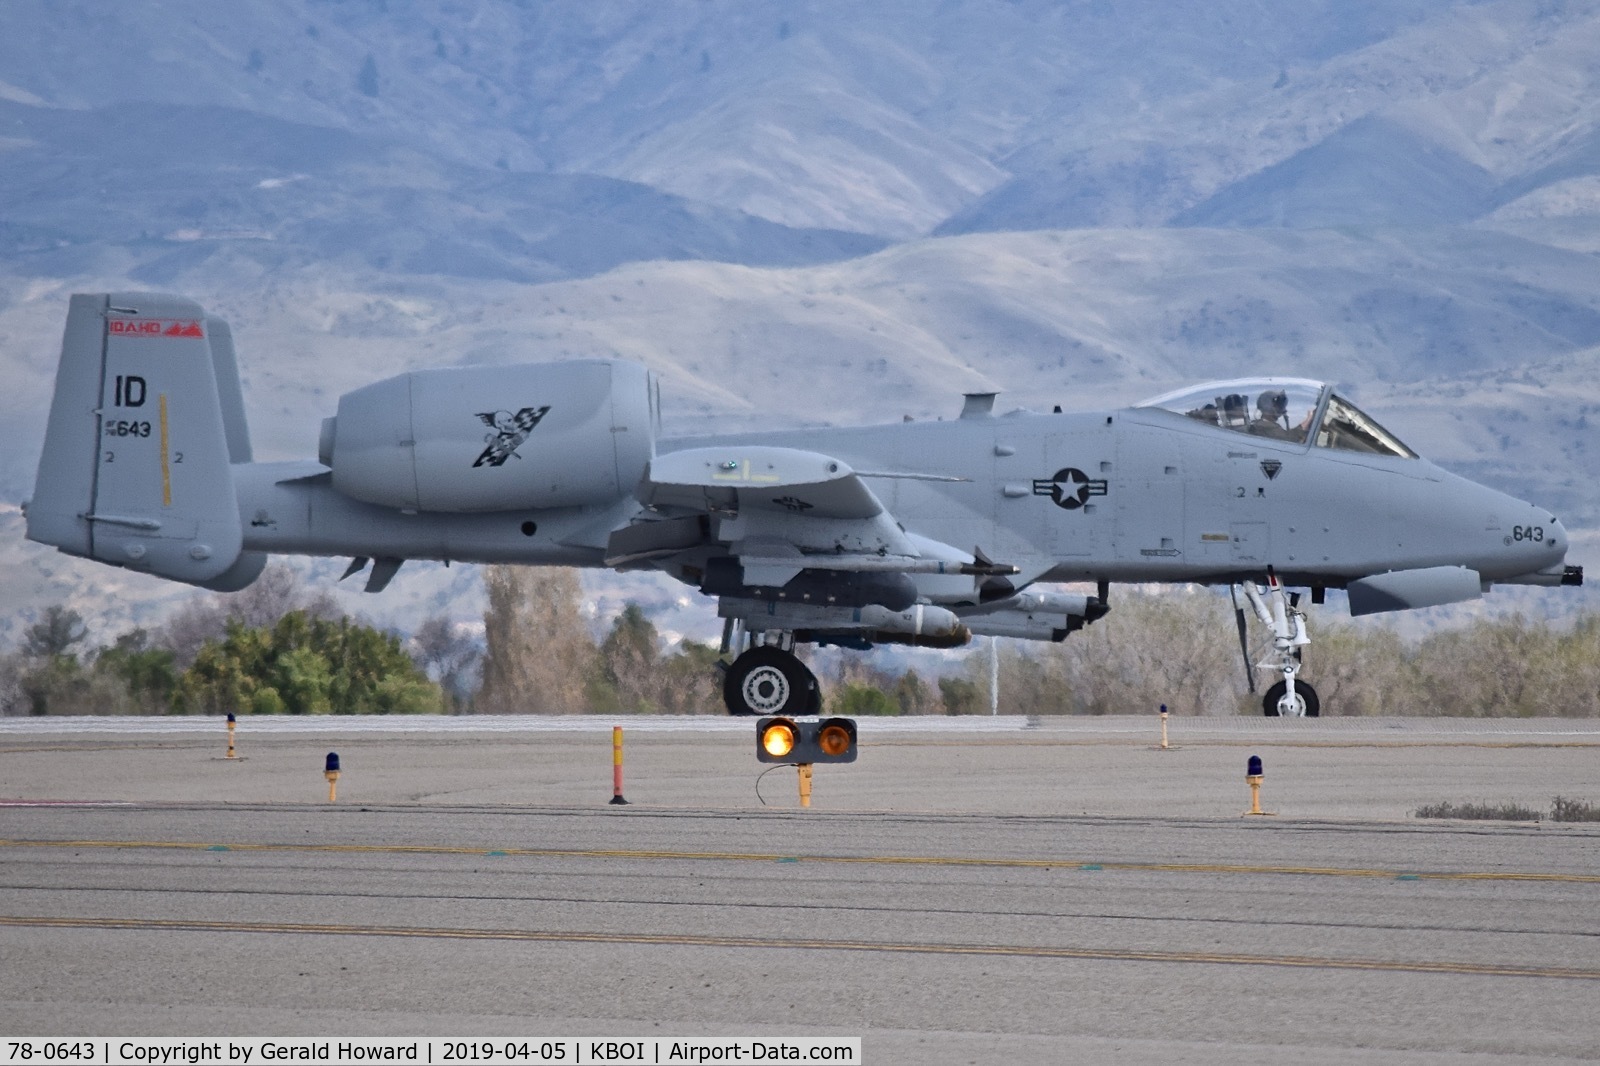 78-0643, 1978 Fairchild Republic A-10C Thunderbolt II C/N A10-0263, Starting take off run. 190th Fighter Sq., 124th Fighter Wing, Idaho ANG.